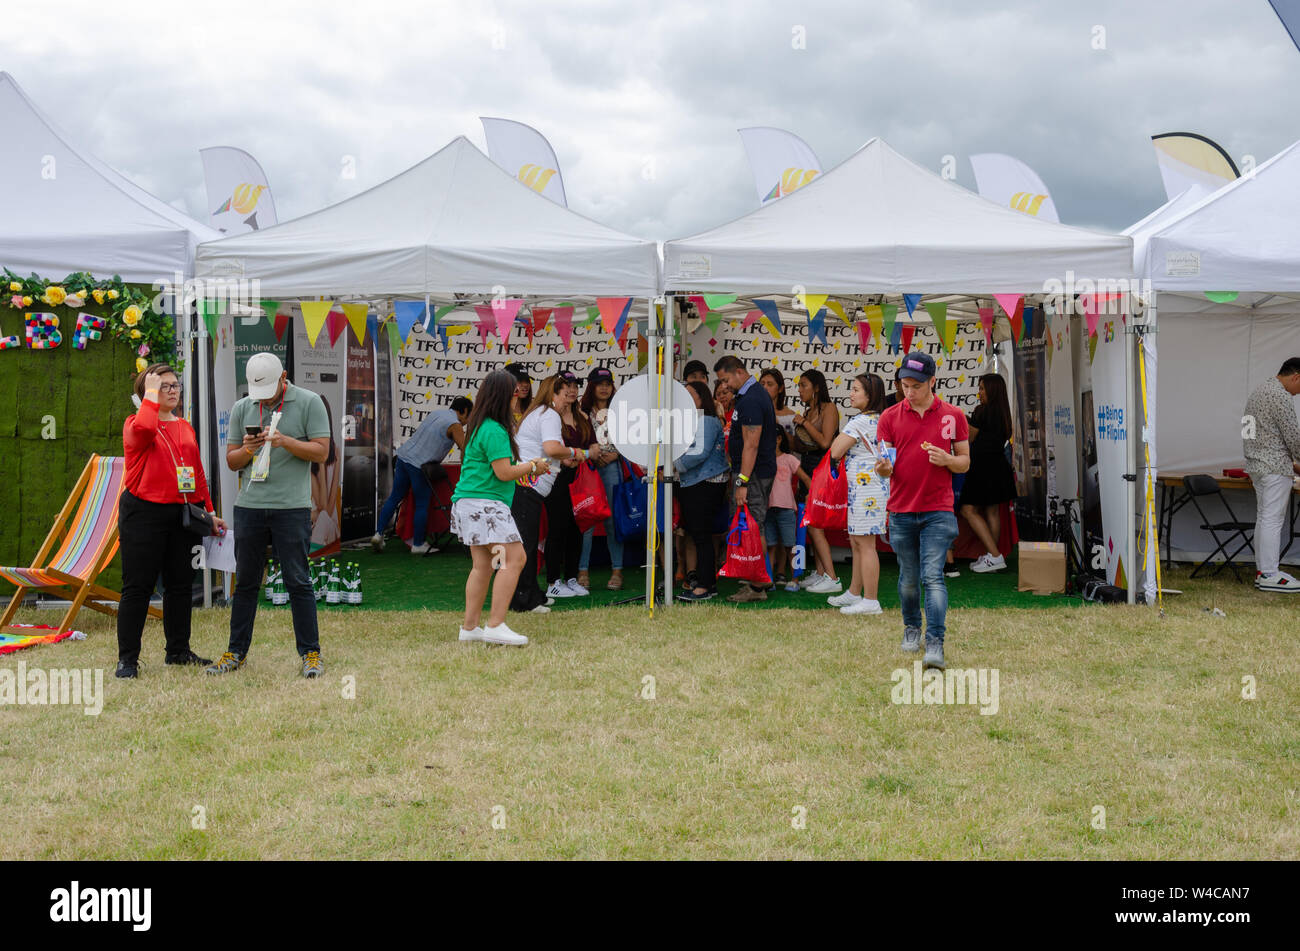 London, UK - July 21st 2019: The Barrio Fiesta 2019 took place on Apps Court Farm at Walton-on-Thames. An annual festival celebrating Filipino food an Stock Photo